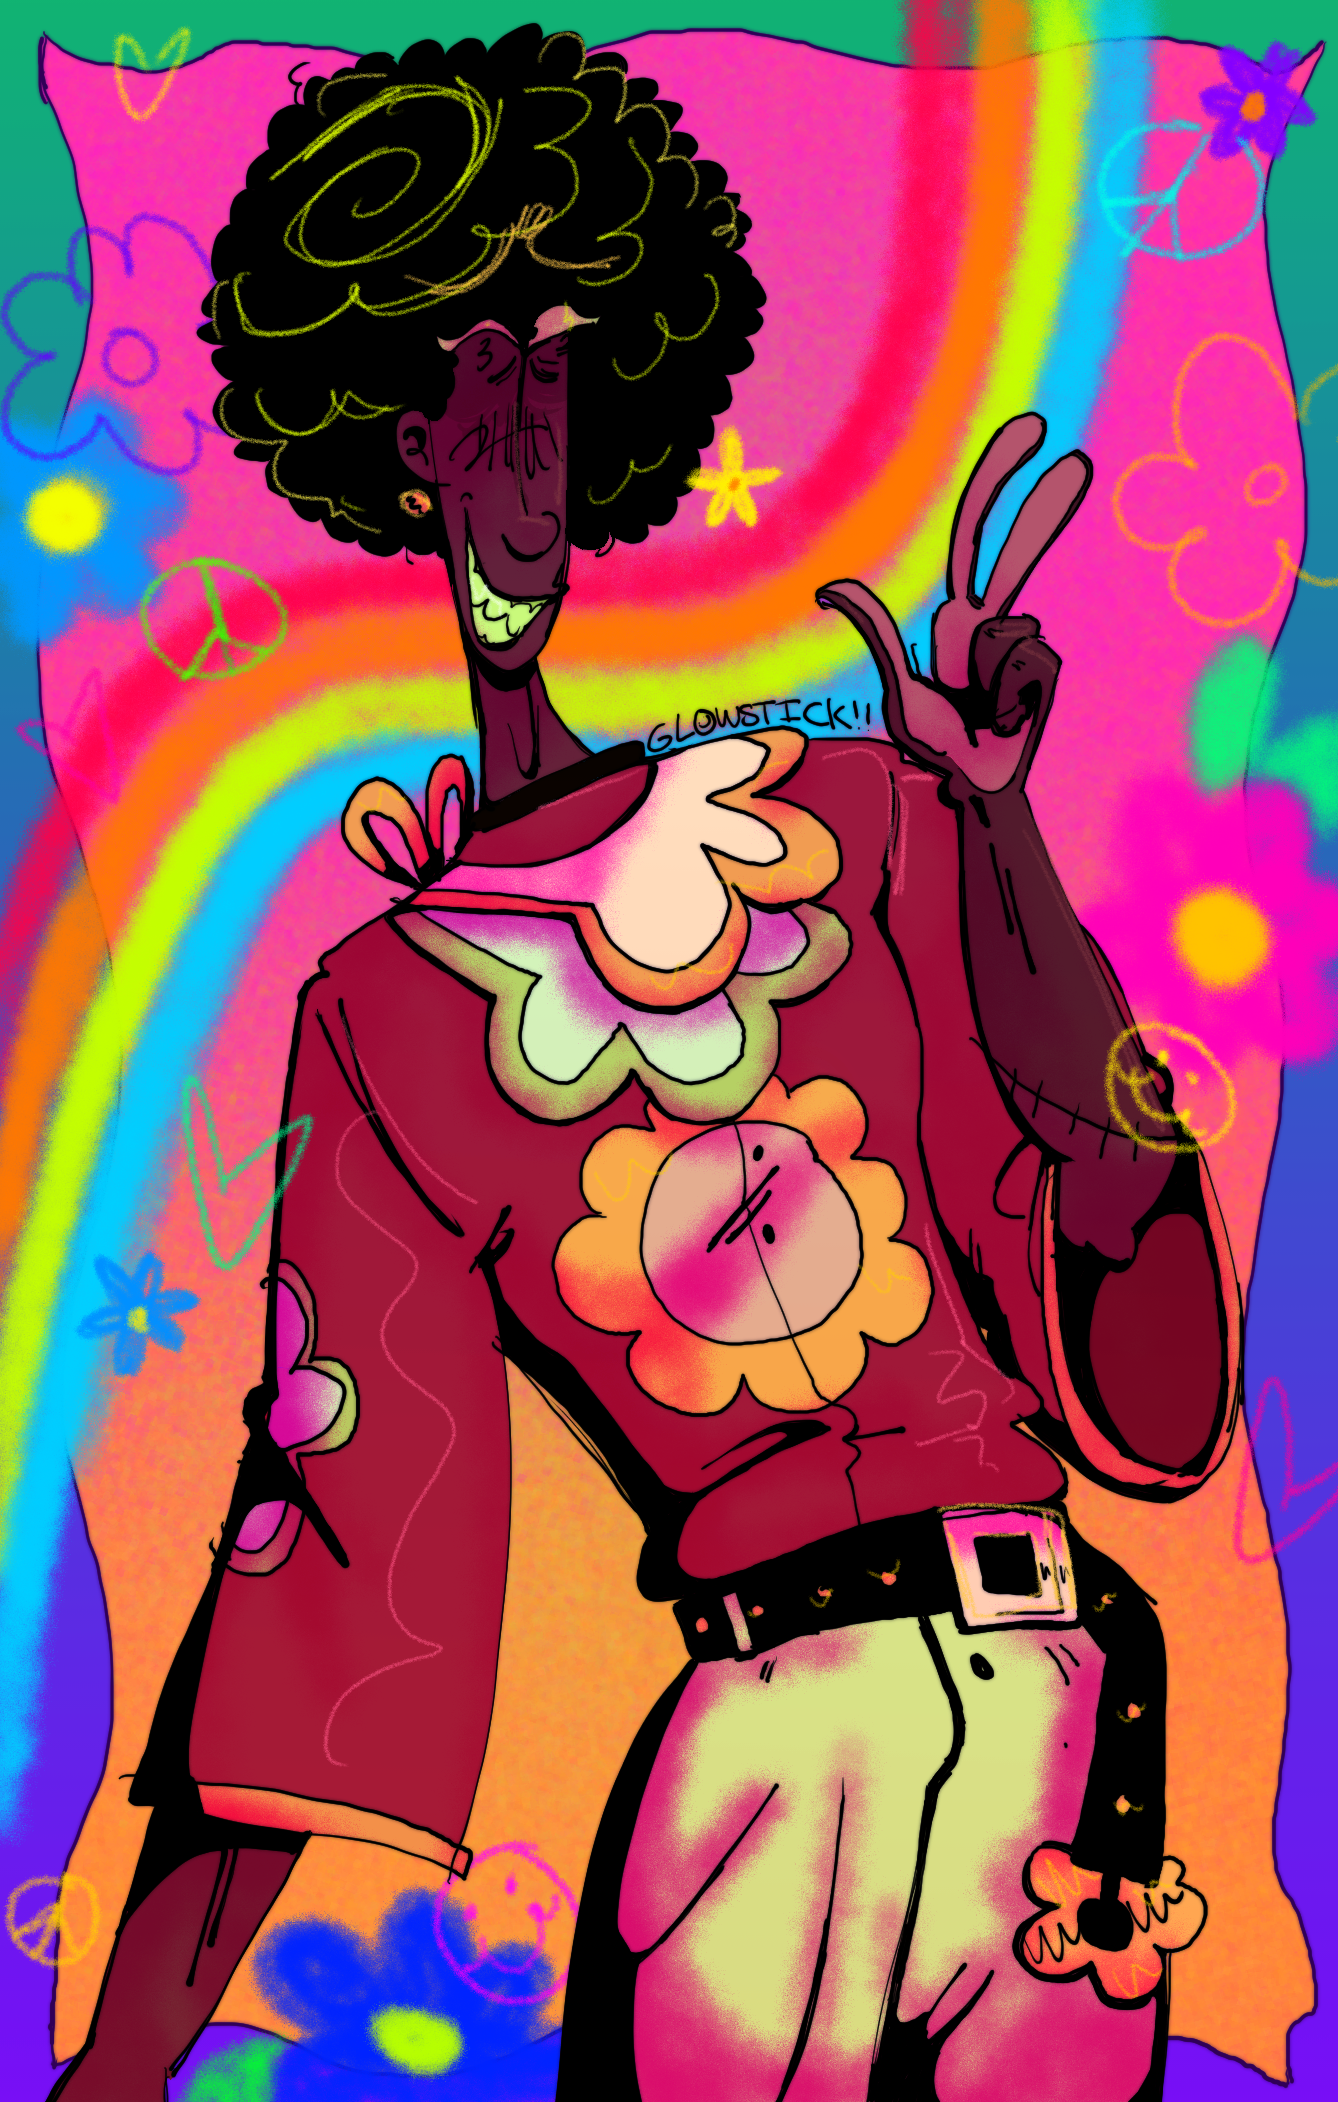 A brightly colored digital drawing of a dark-skinned woman, Rose, smiling and making a peace sign at the camera. She is wearing a 70s flower-power style outfit and her hair is in a rounded afro. The background is brightly colored and decorated with flowers, peace signs, and smiley-faces.